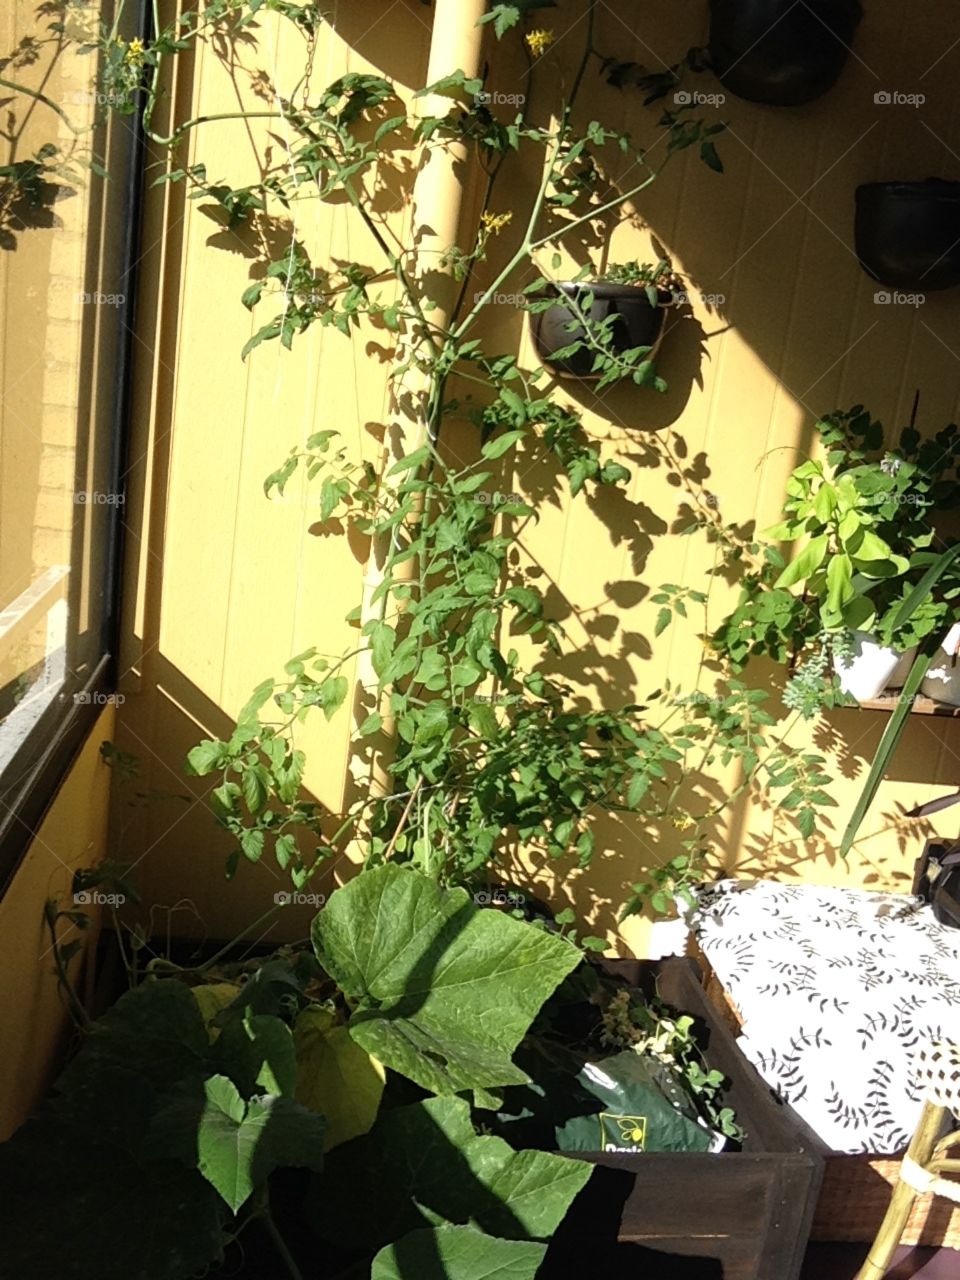 My sister's garden in the balcony, cherry tomatoes,lemoncito from philippines, squash and more.